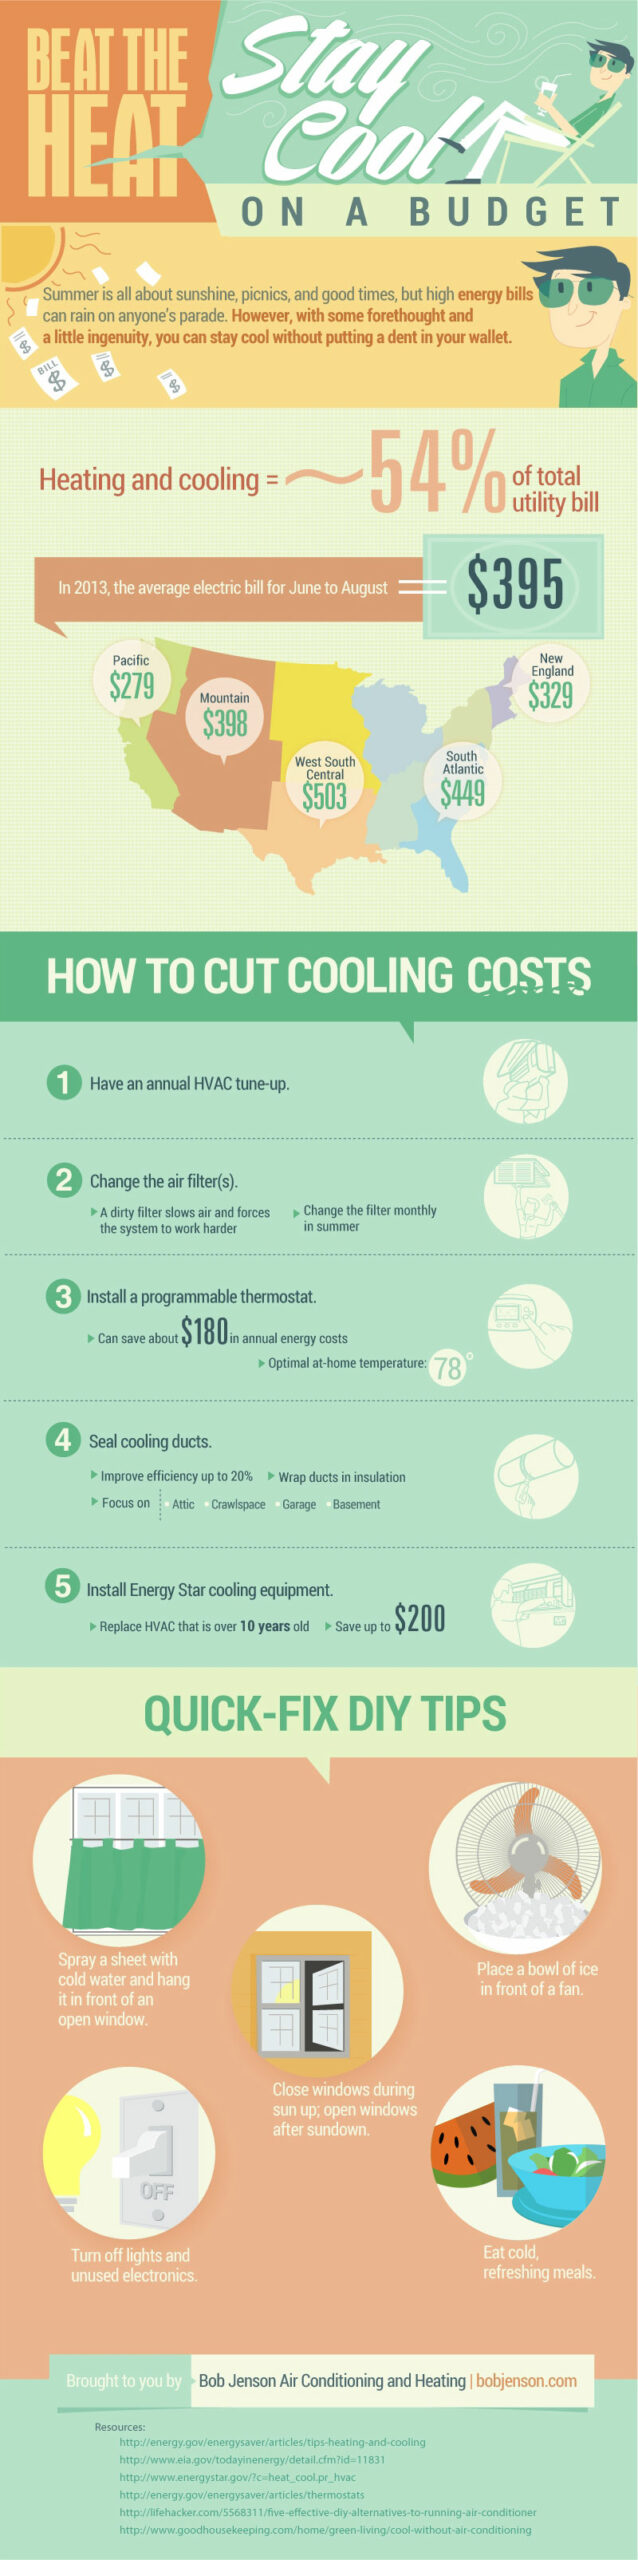 Stay Cool on a Budget, an infographic on how to cut cooling costs